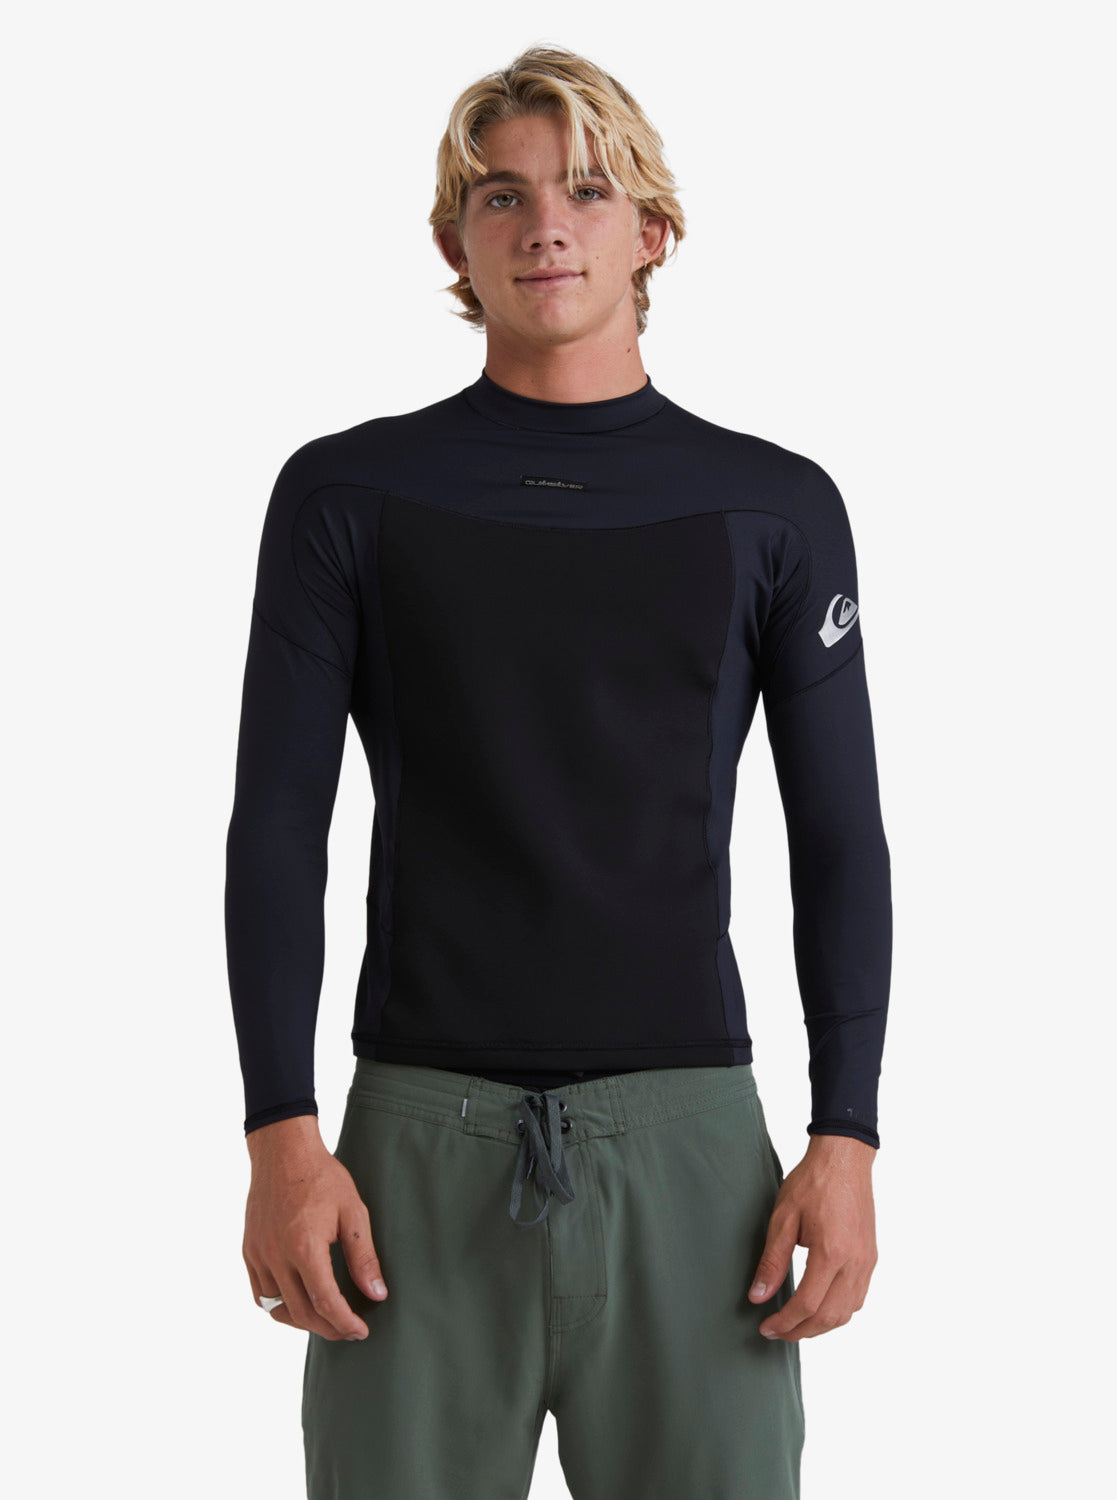 Quiksilver Mens 1mm Everyday Sessions Neoprene Wetsuit Top